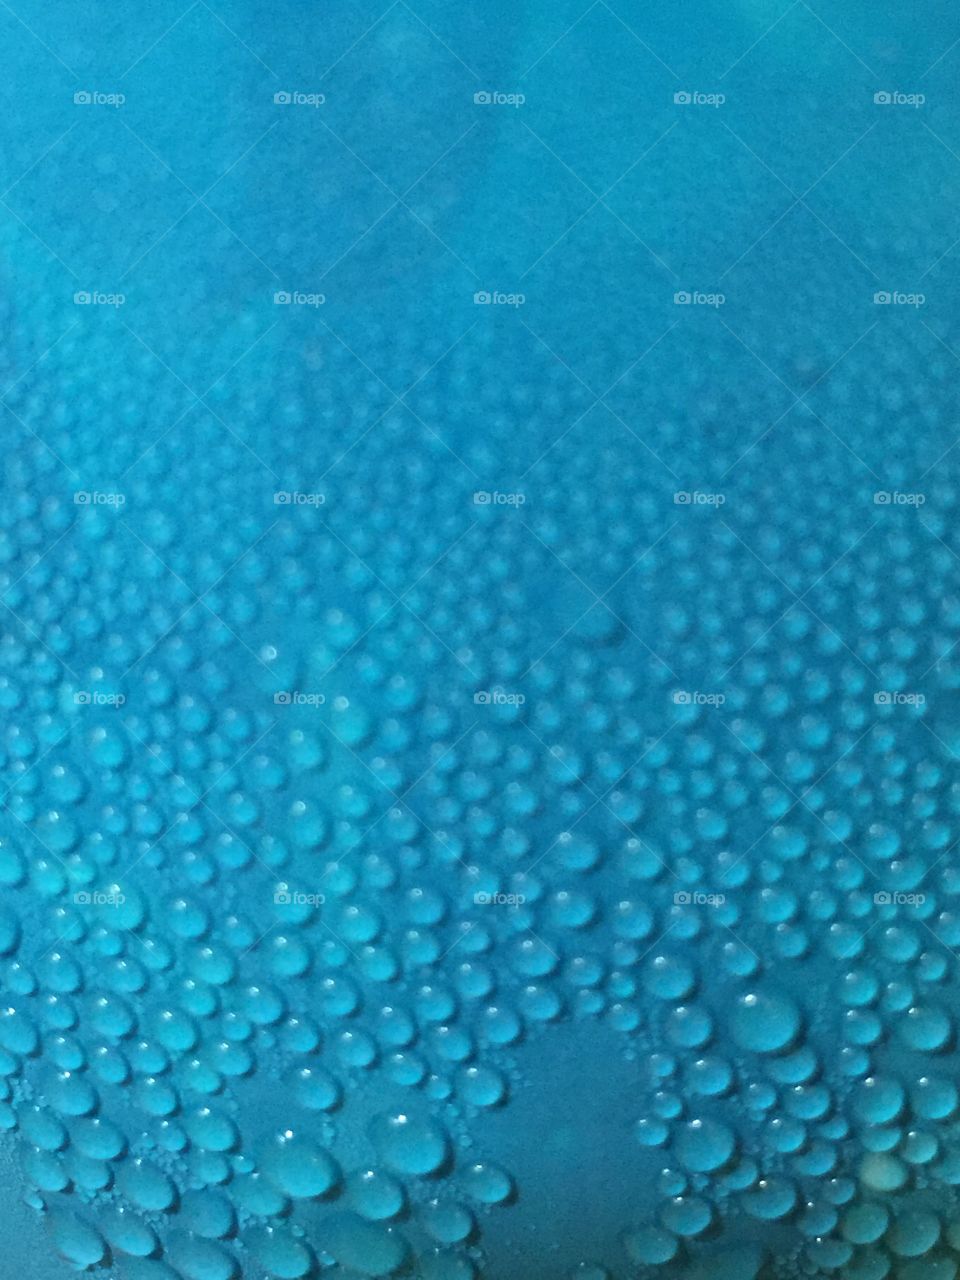 Blue bubbles. It's a moment of time